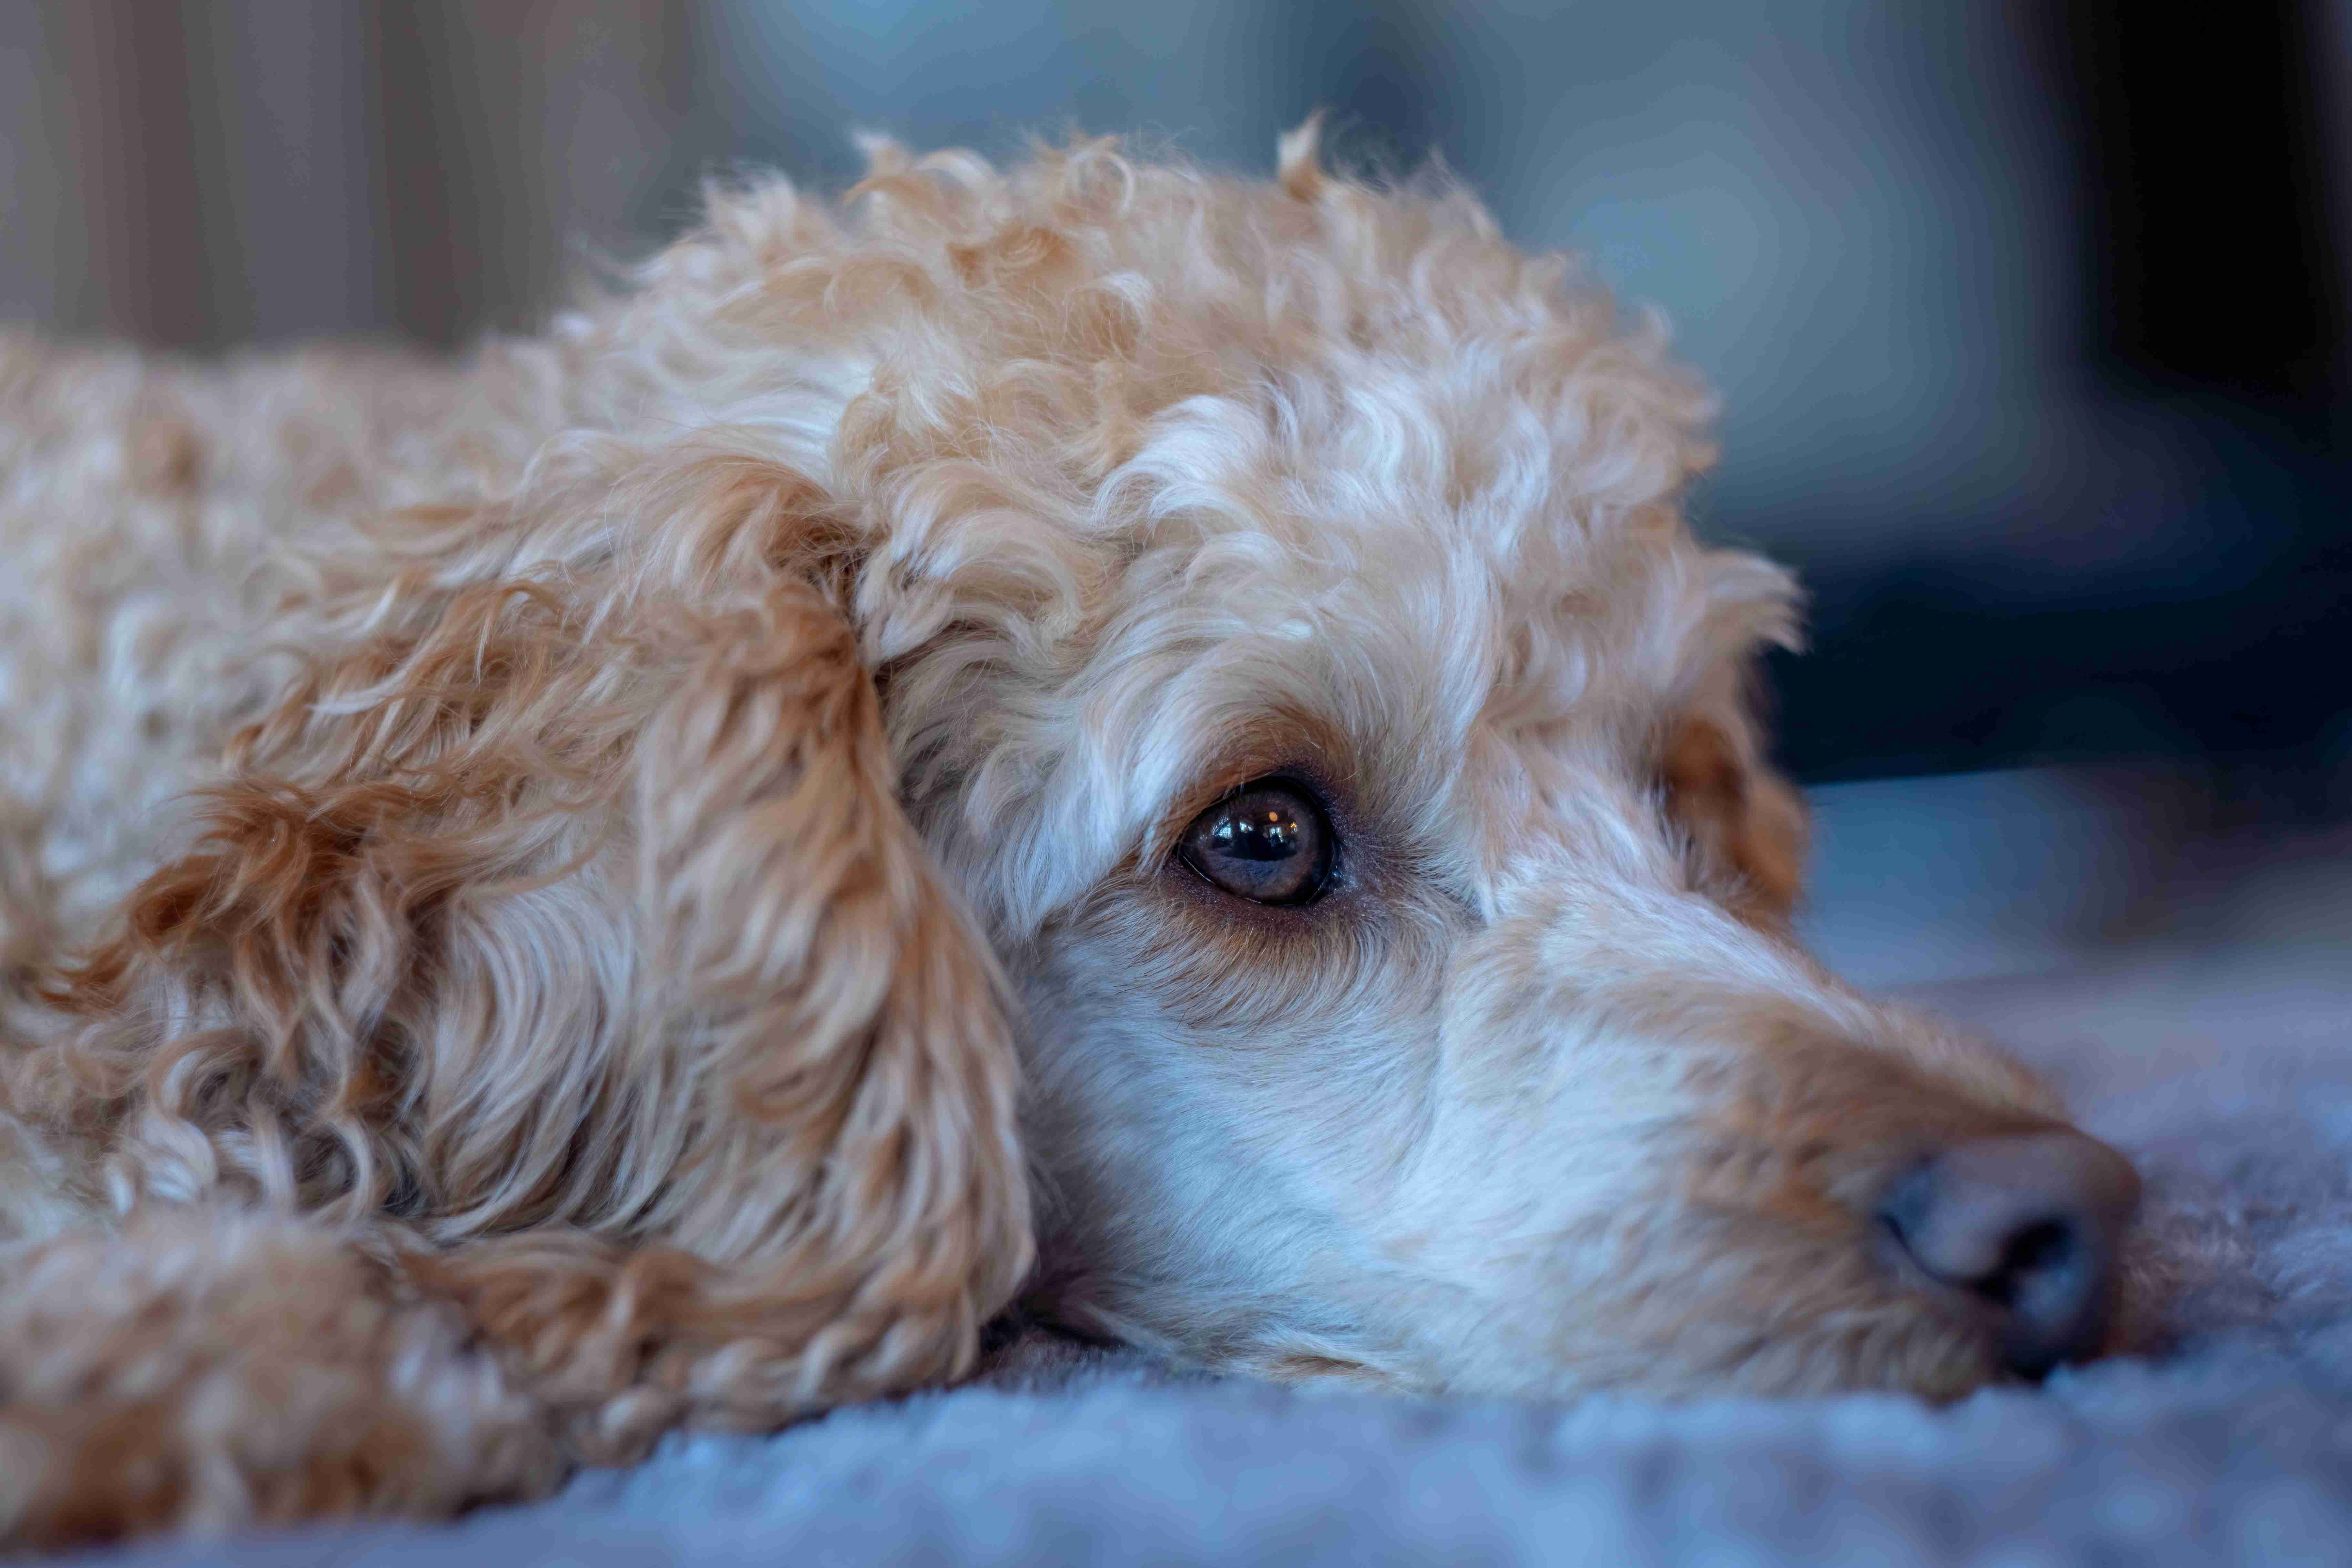 Do Poodles commonly suffer from urinary tract infections? How can they be treated?